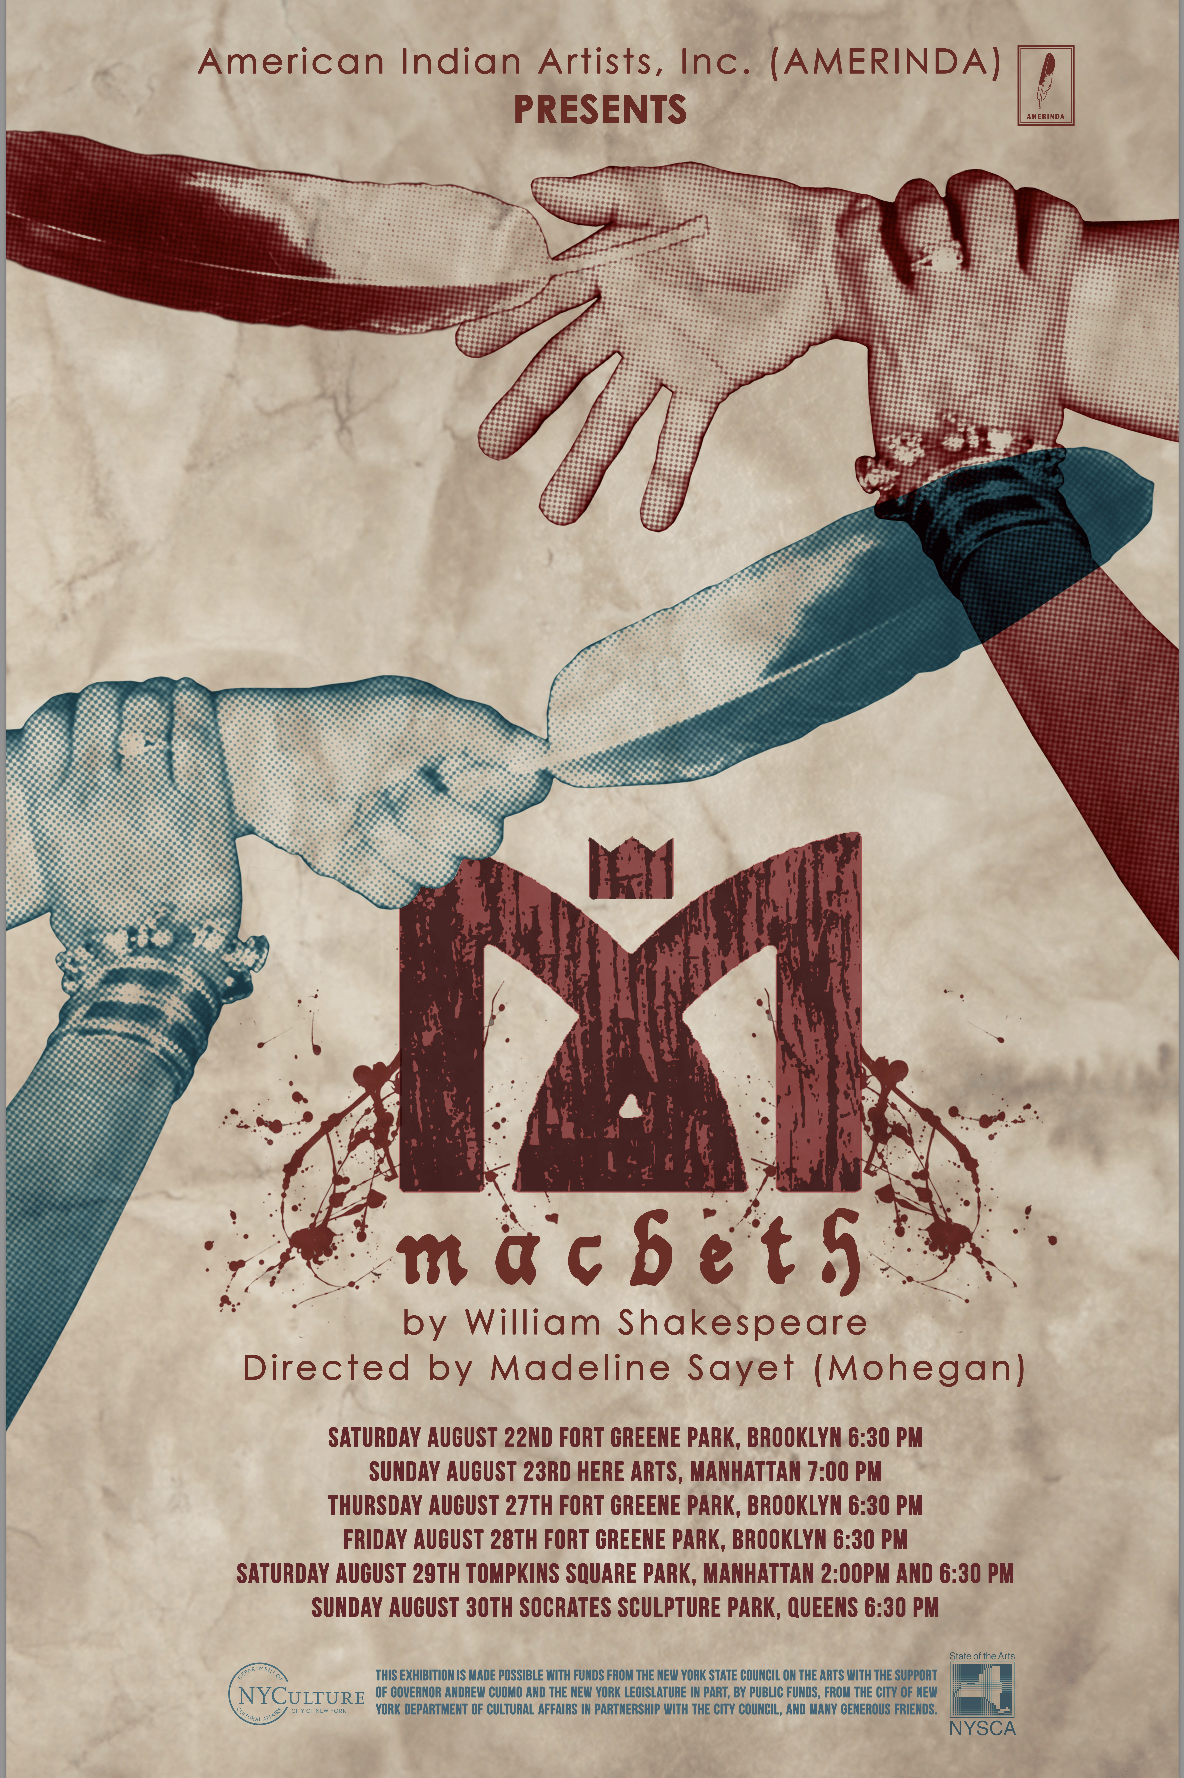 Promotional poster for American Indian Artists, INC.'s adaptation of Macbeth, written by William Shakespeare and directed by Madeline Sayet. 